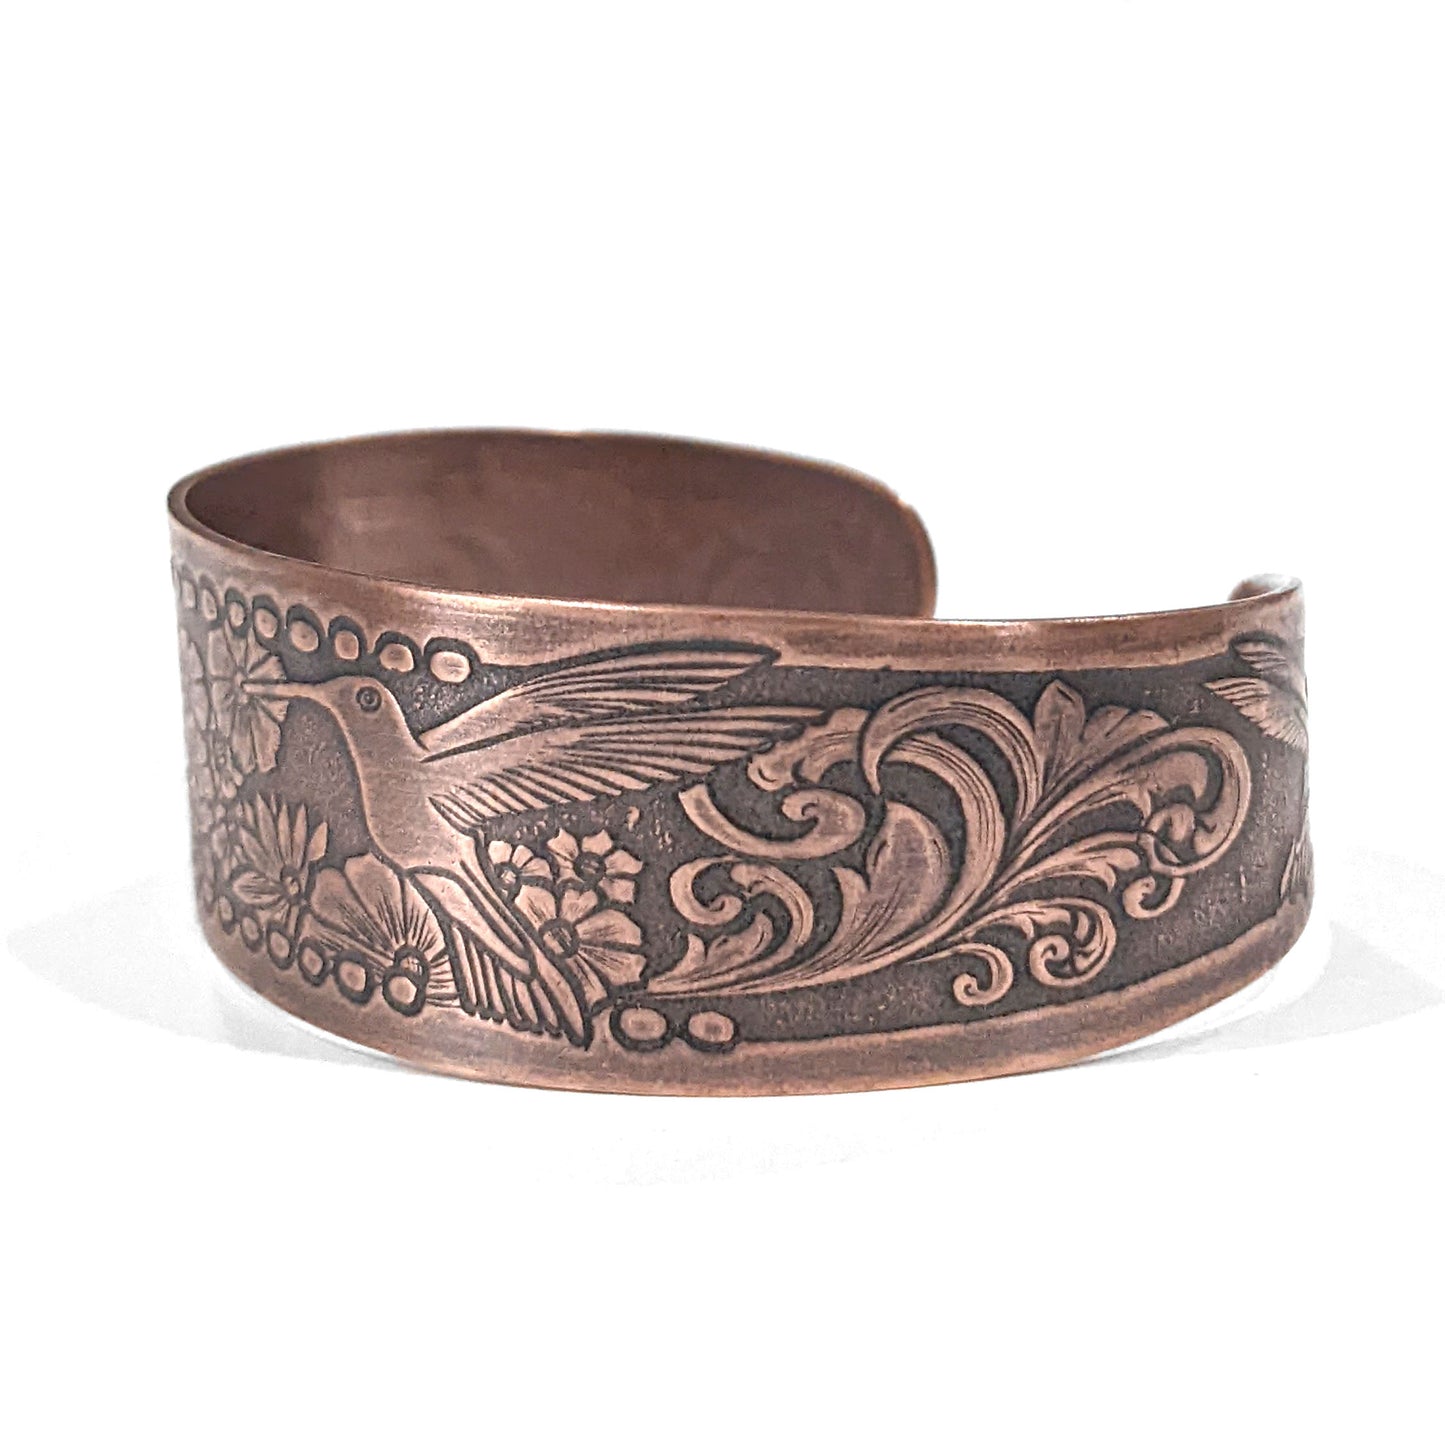 Copper cuff bracelet with hummingbirds and flowers. The main scene is a hummingbird in flight drinking nectar from one of a field of flowers. At each end of the cuff there is a smaller hummingbird drinking from a single flower. The cuff is tapered, just under and inch wide at the center tapering to one half inch at the ends. This is side view showing a flourish design.